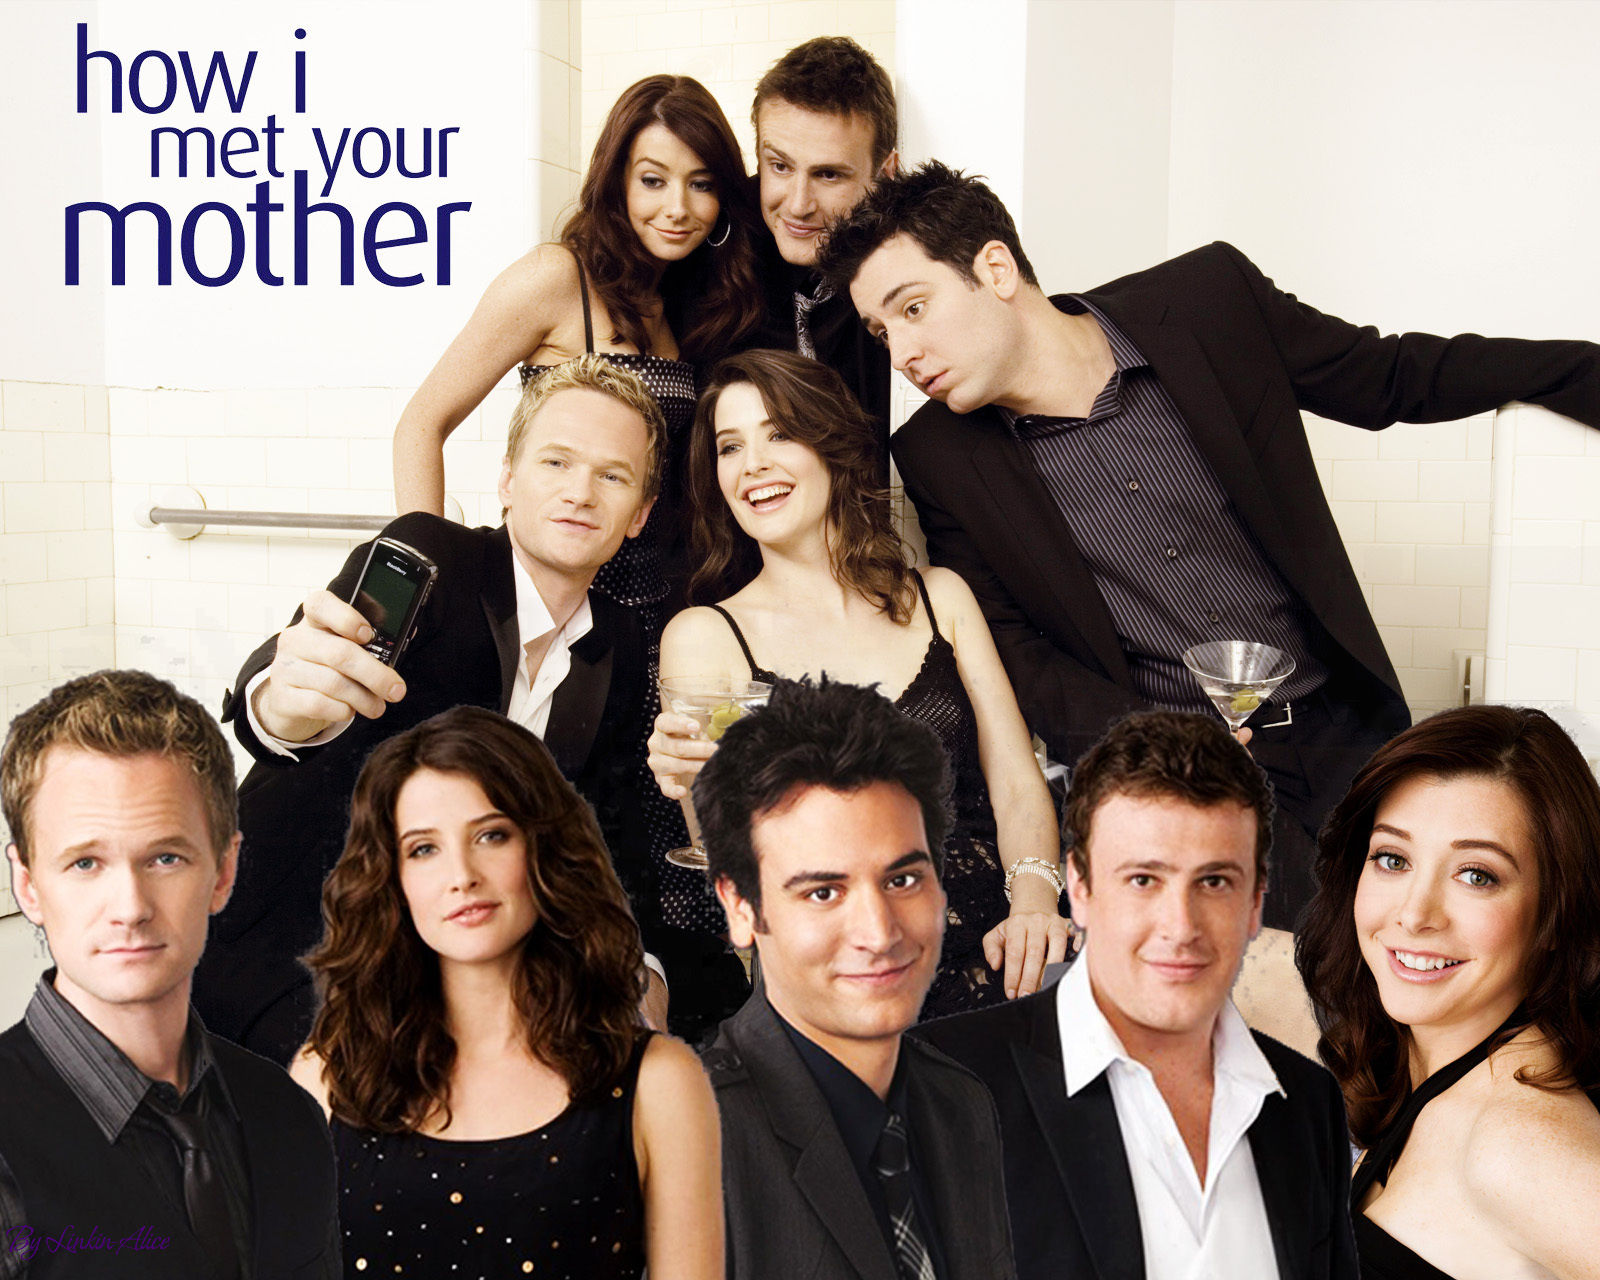 How I Met Your Mother Theme Song | Movie Theme Songs & TV Soundtracks